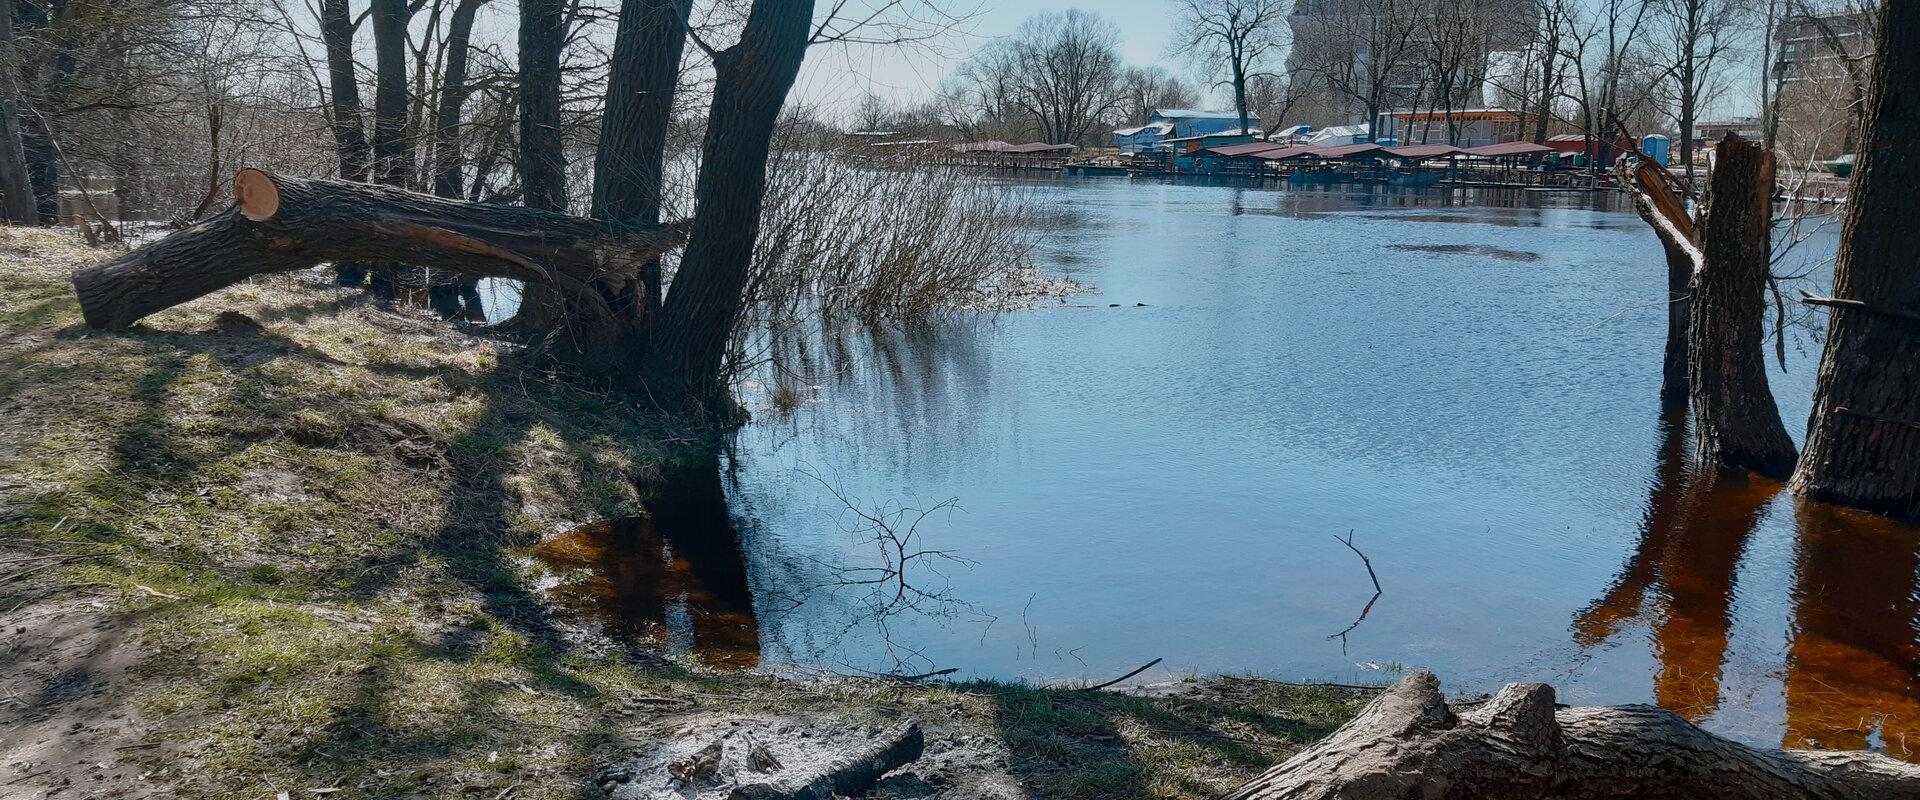 There are several picnic areas on the Emajõe river shore path